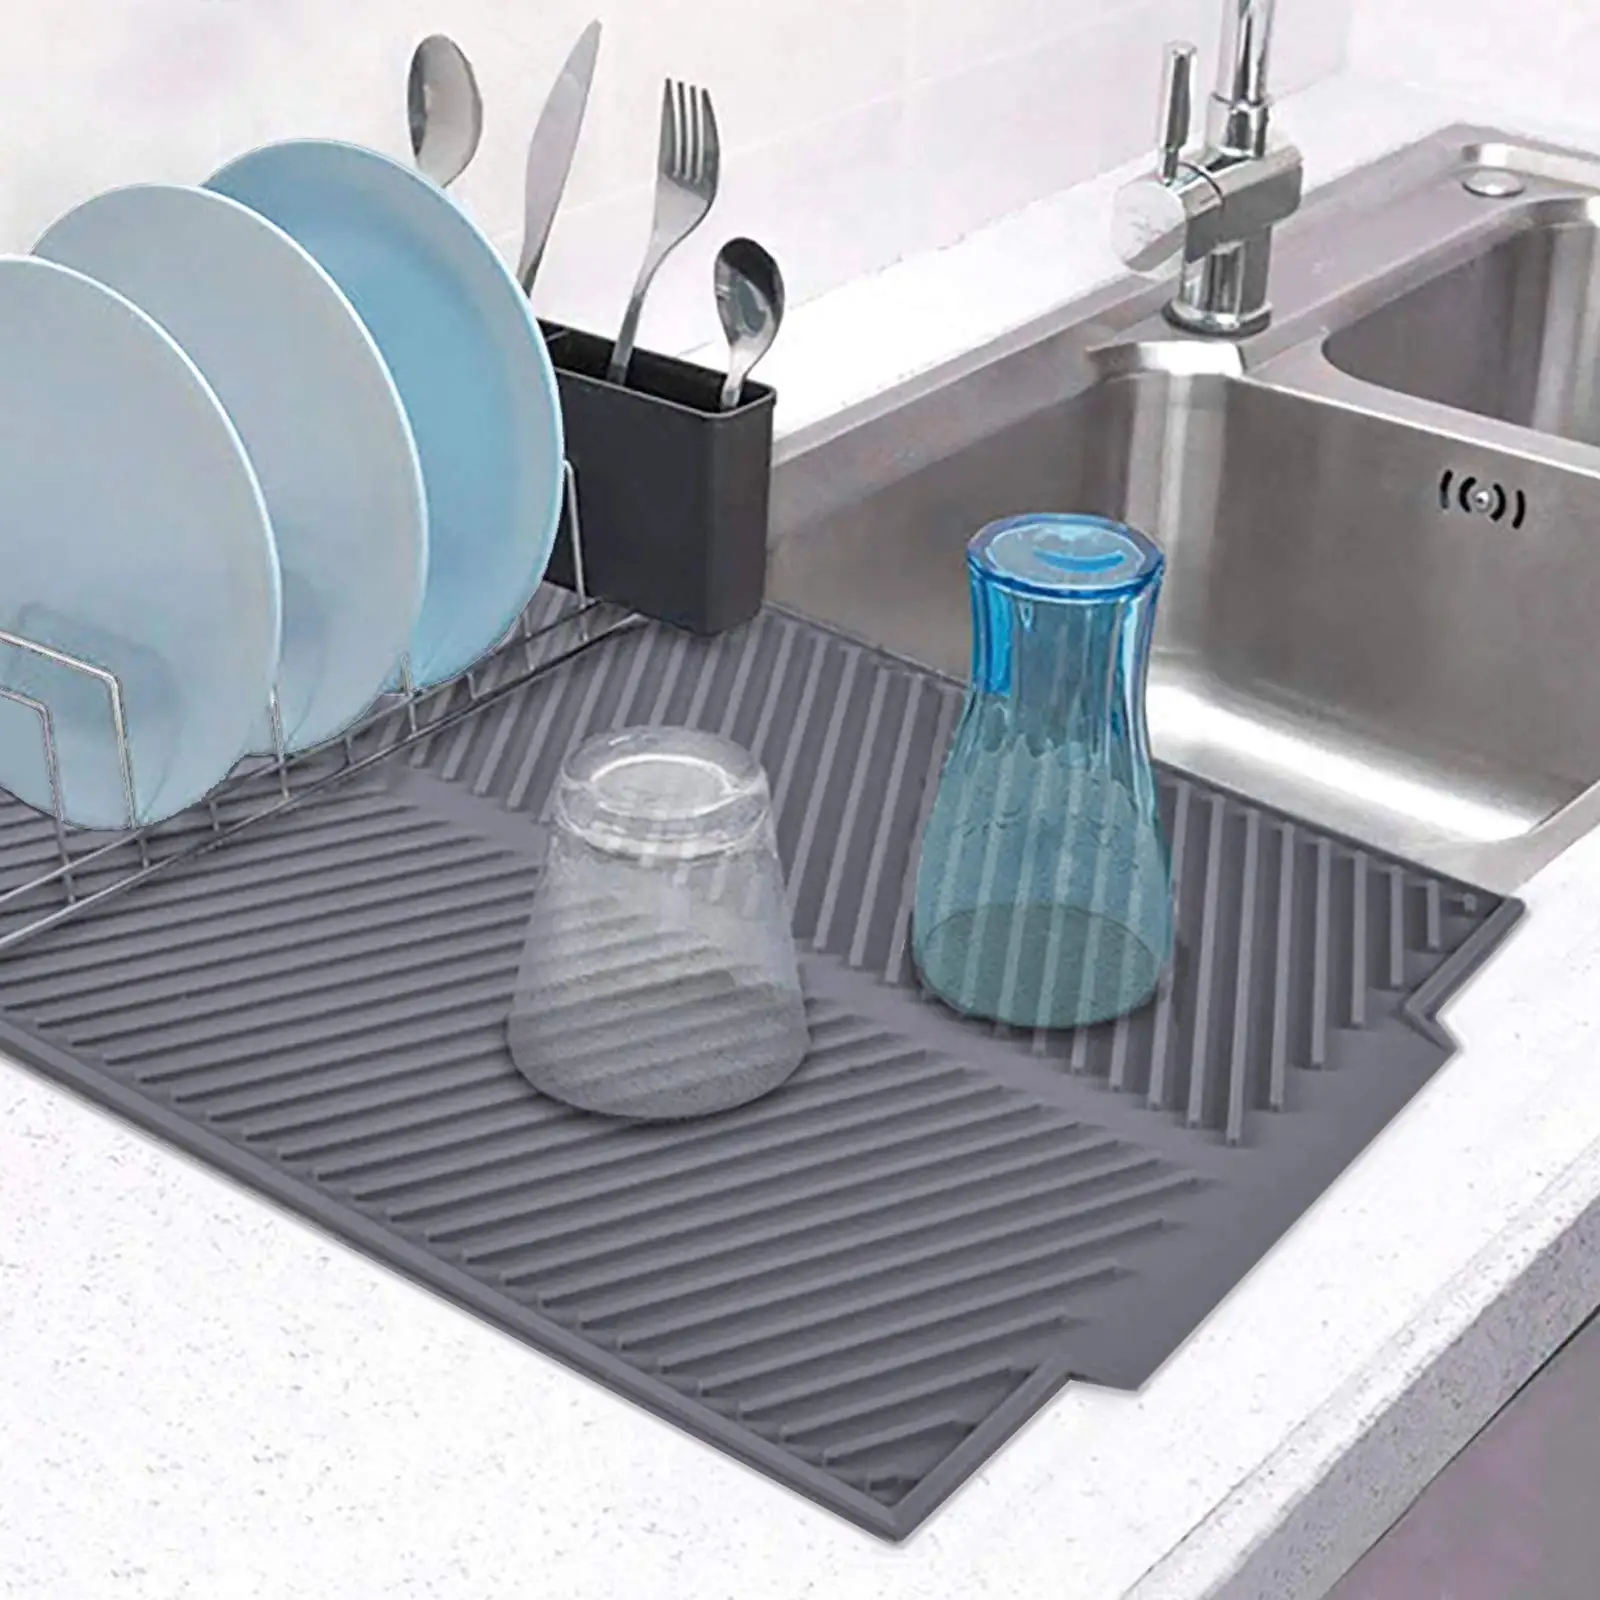 https://ae01.alicdn.com/kf/S032e7522beb24f90aee9d3f867bf0dbfV/Foldable-Rubber-Dishes-Protector-Sink-Mat-Silicone-Drain-Pad-Table-Kitchen-Home-Anti-Slip-Drying-Dishes.jpg